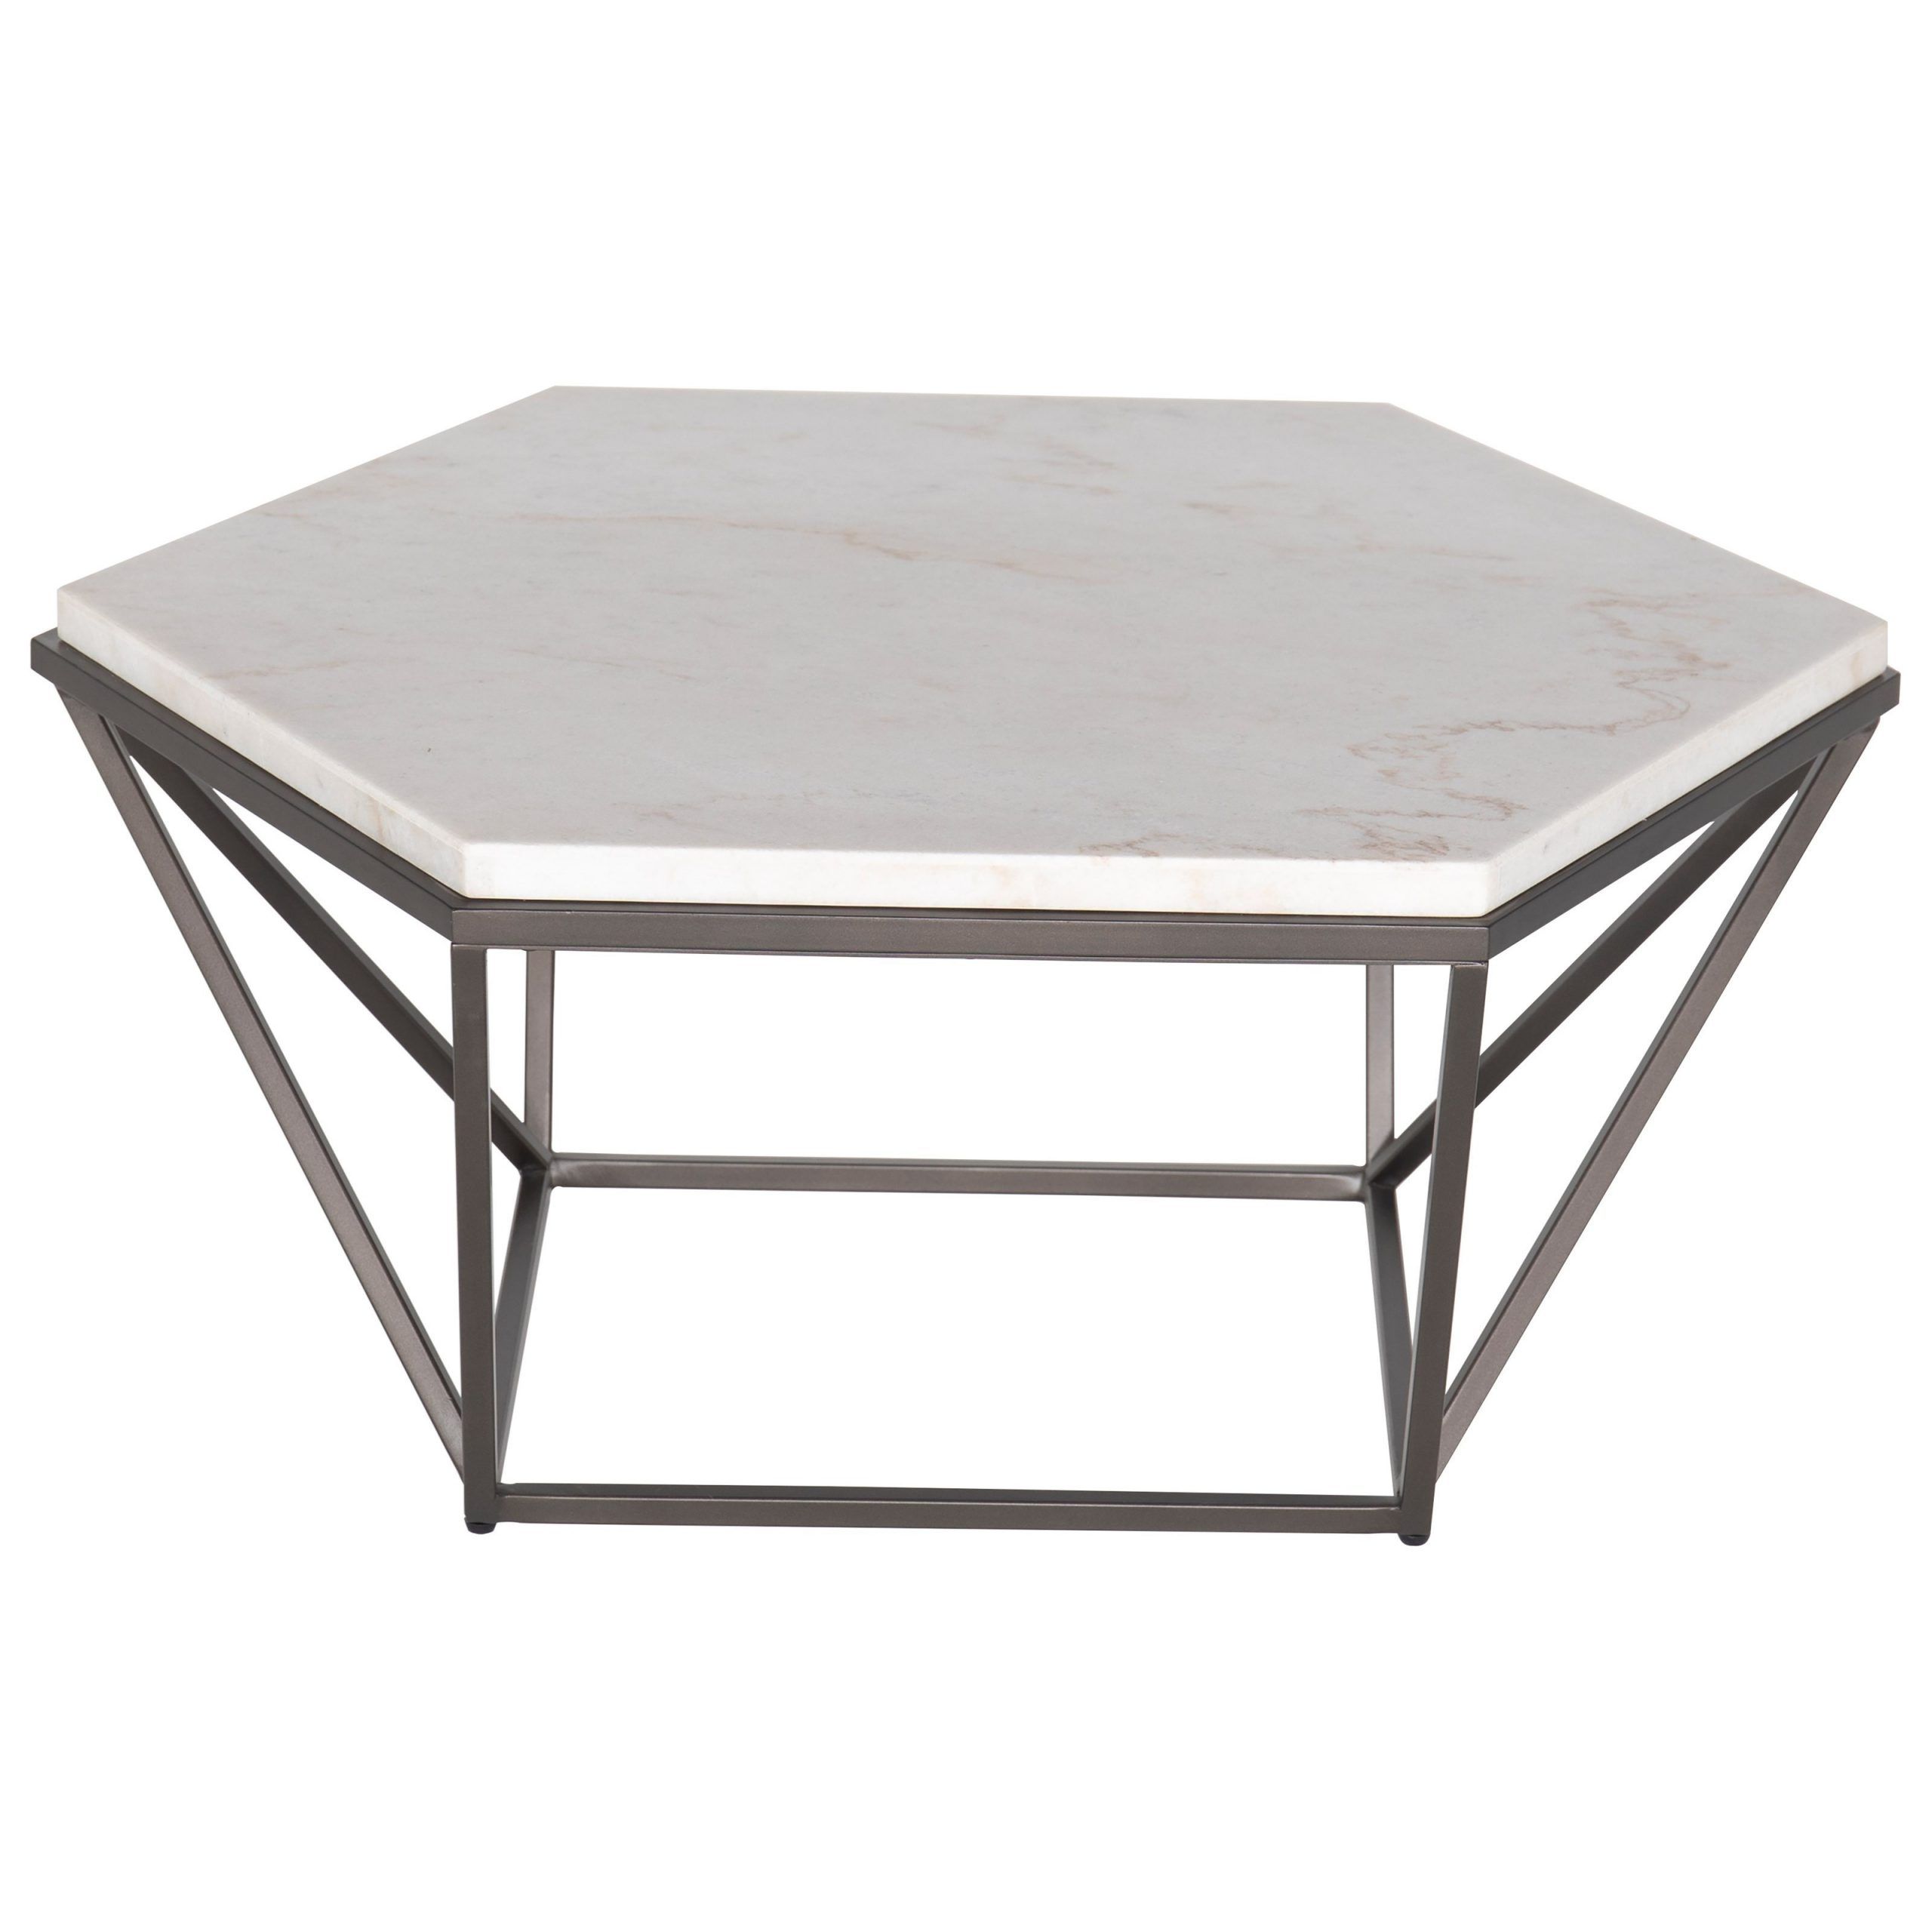 Steve Silver Corvus Contemporary Cocktail Table With For Recent White Grained Wood Hexagonal Coffee Tables (View 5 of 20)